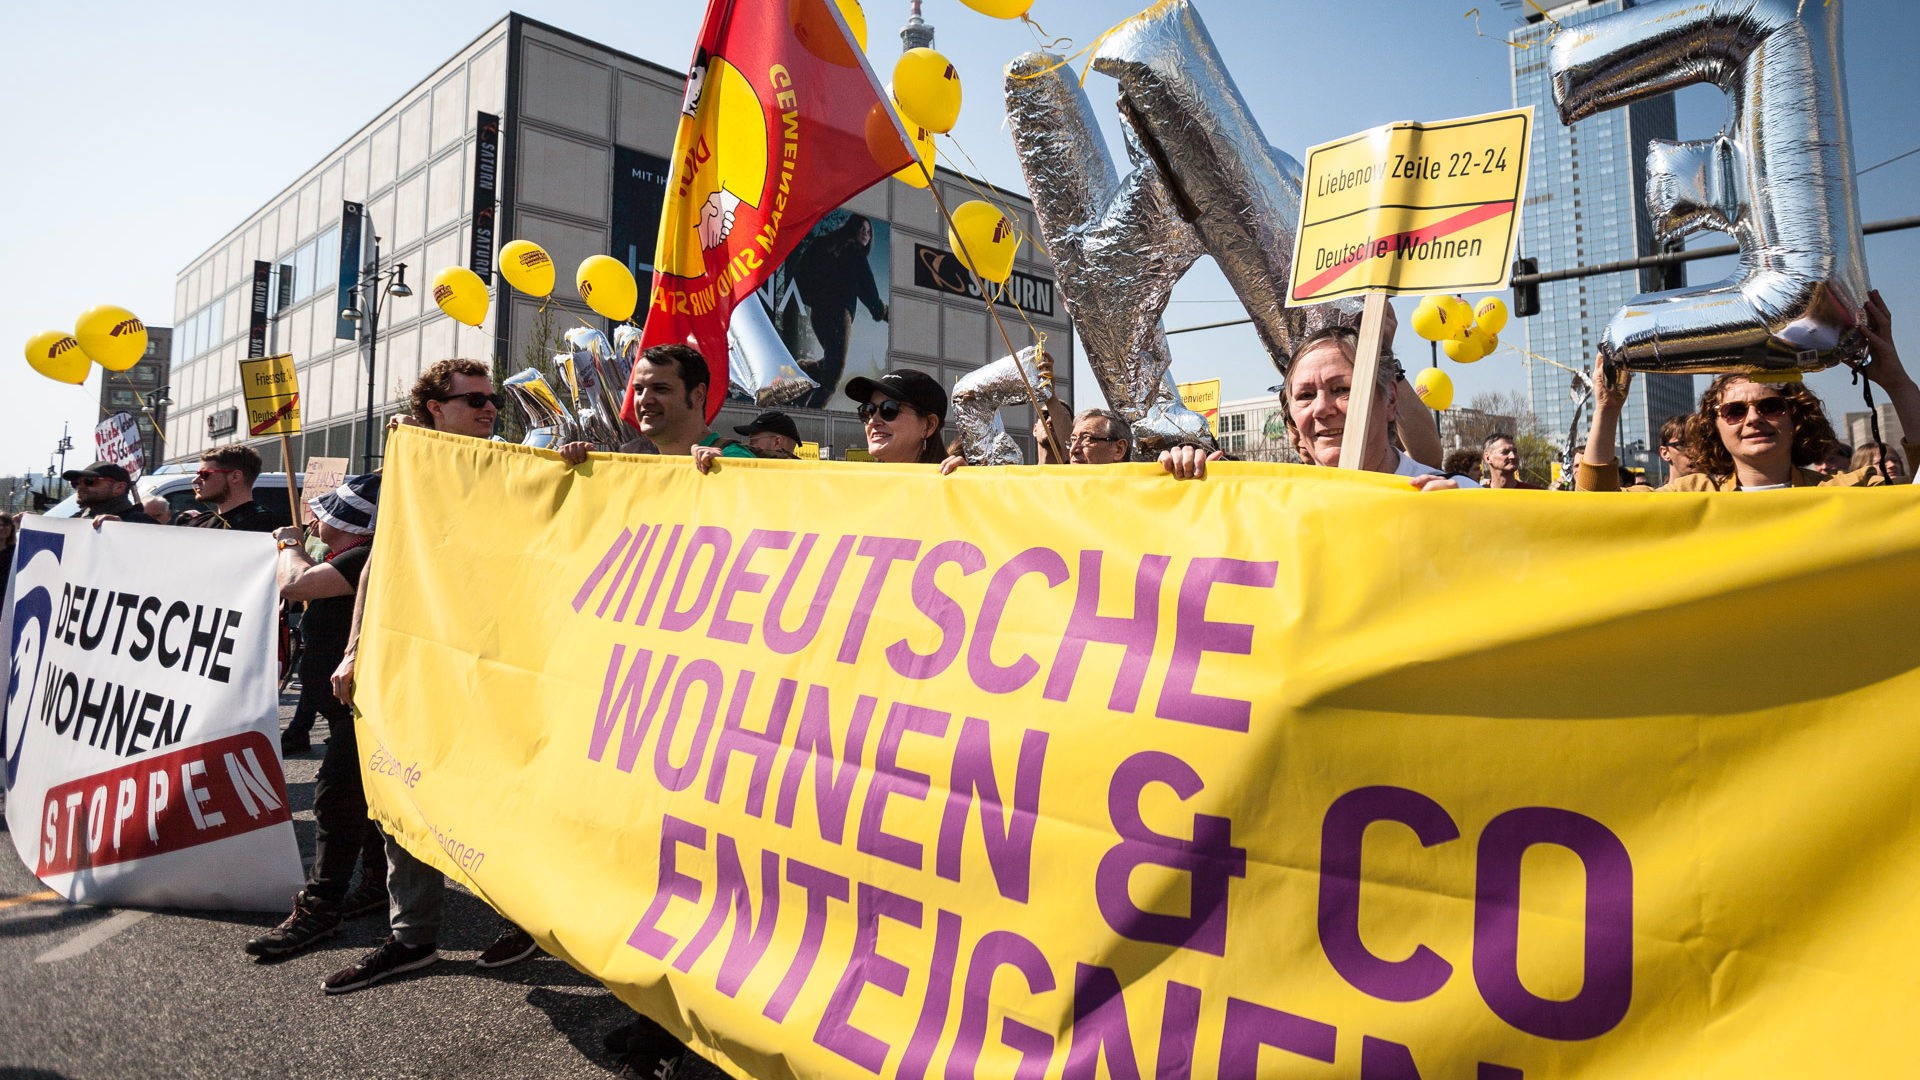 People marching and holding a big yellow and purple banner in favor of expropriating Berlin landlords.